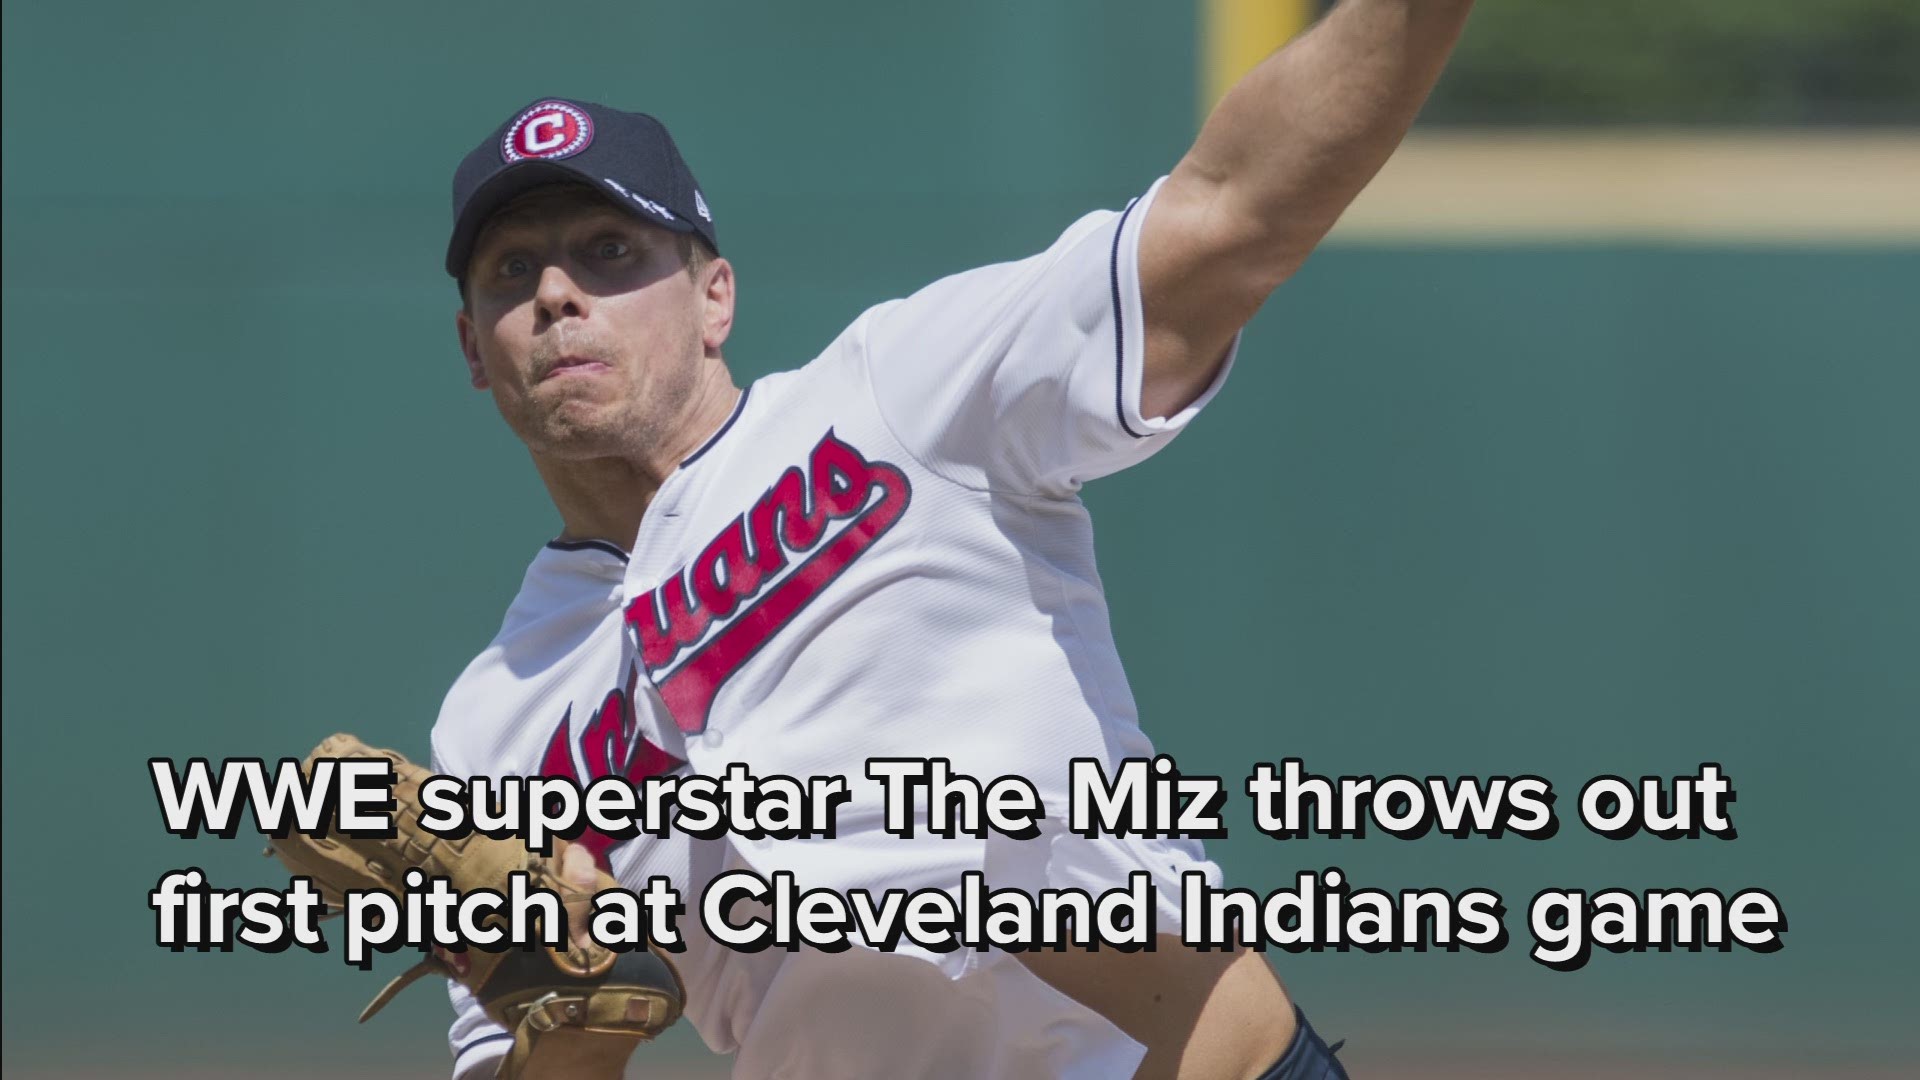 Watch: WWE superstar The Miz throws out first pitch at Cleveland Indians game